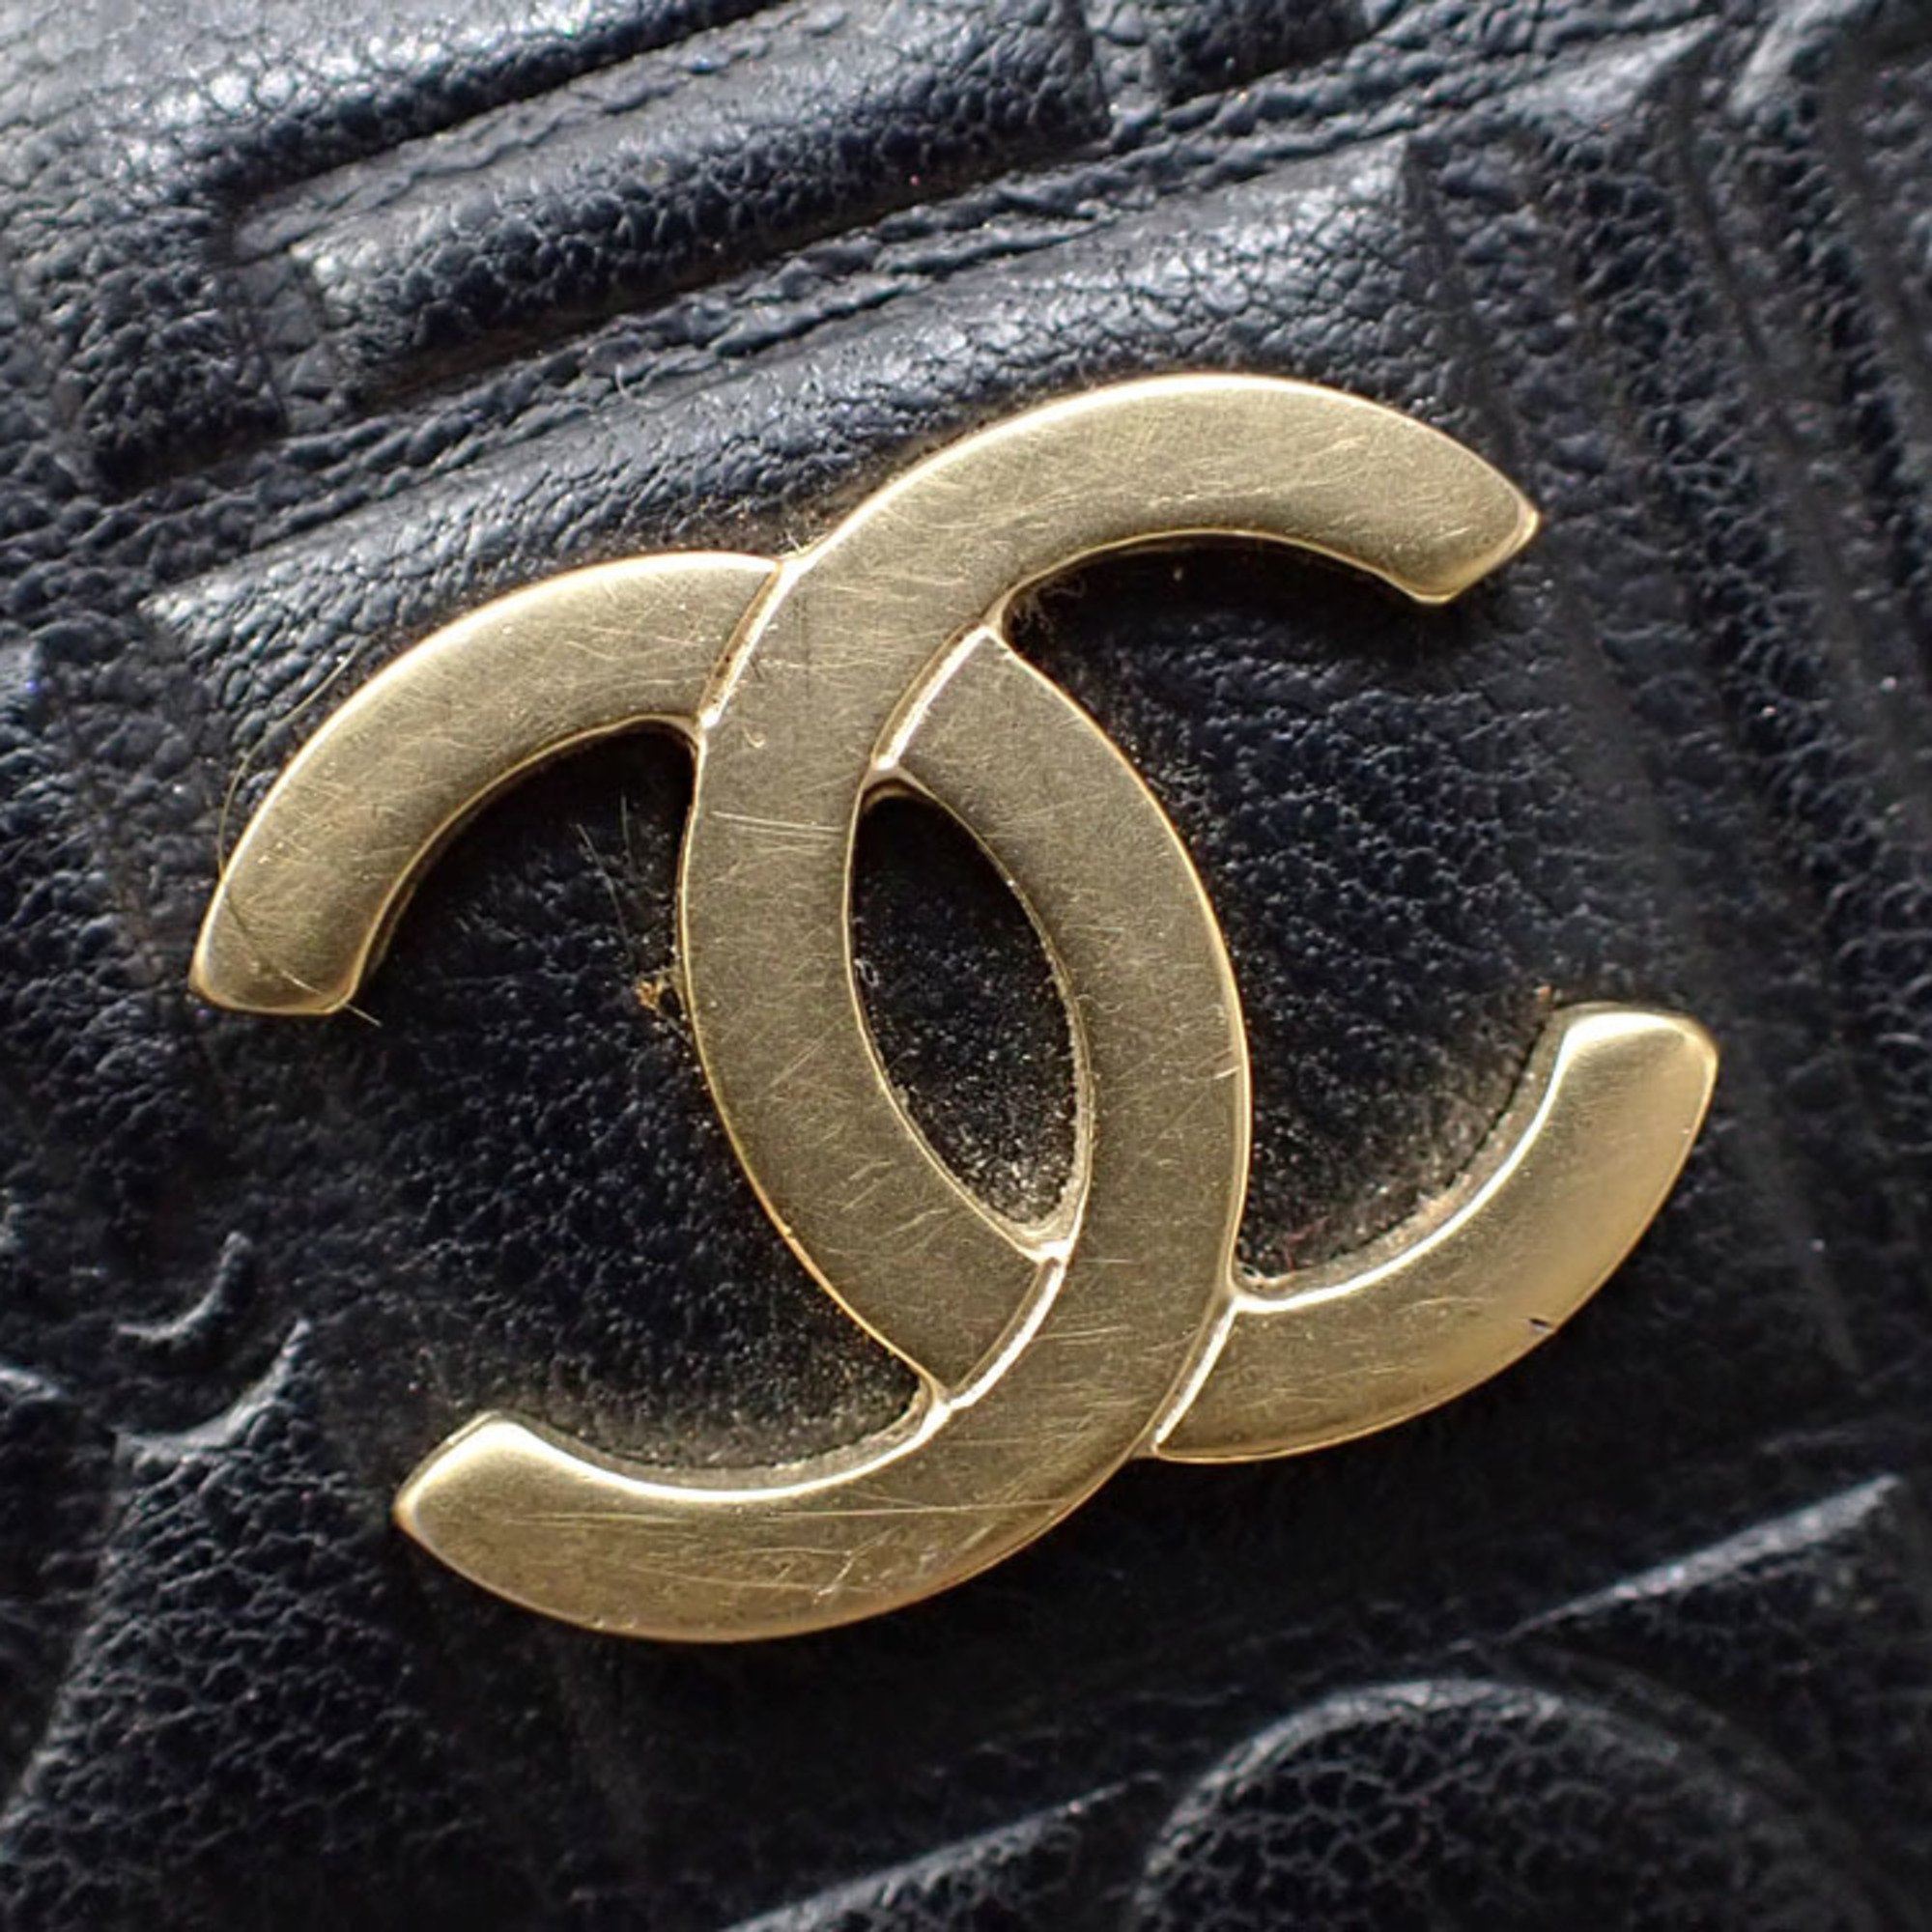 Chanel 6-ring key case Icon Line Women's Black Leather Key holder Coco Mark A2231496